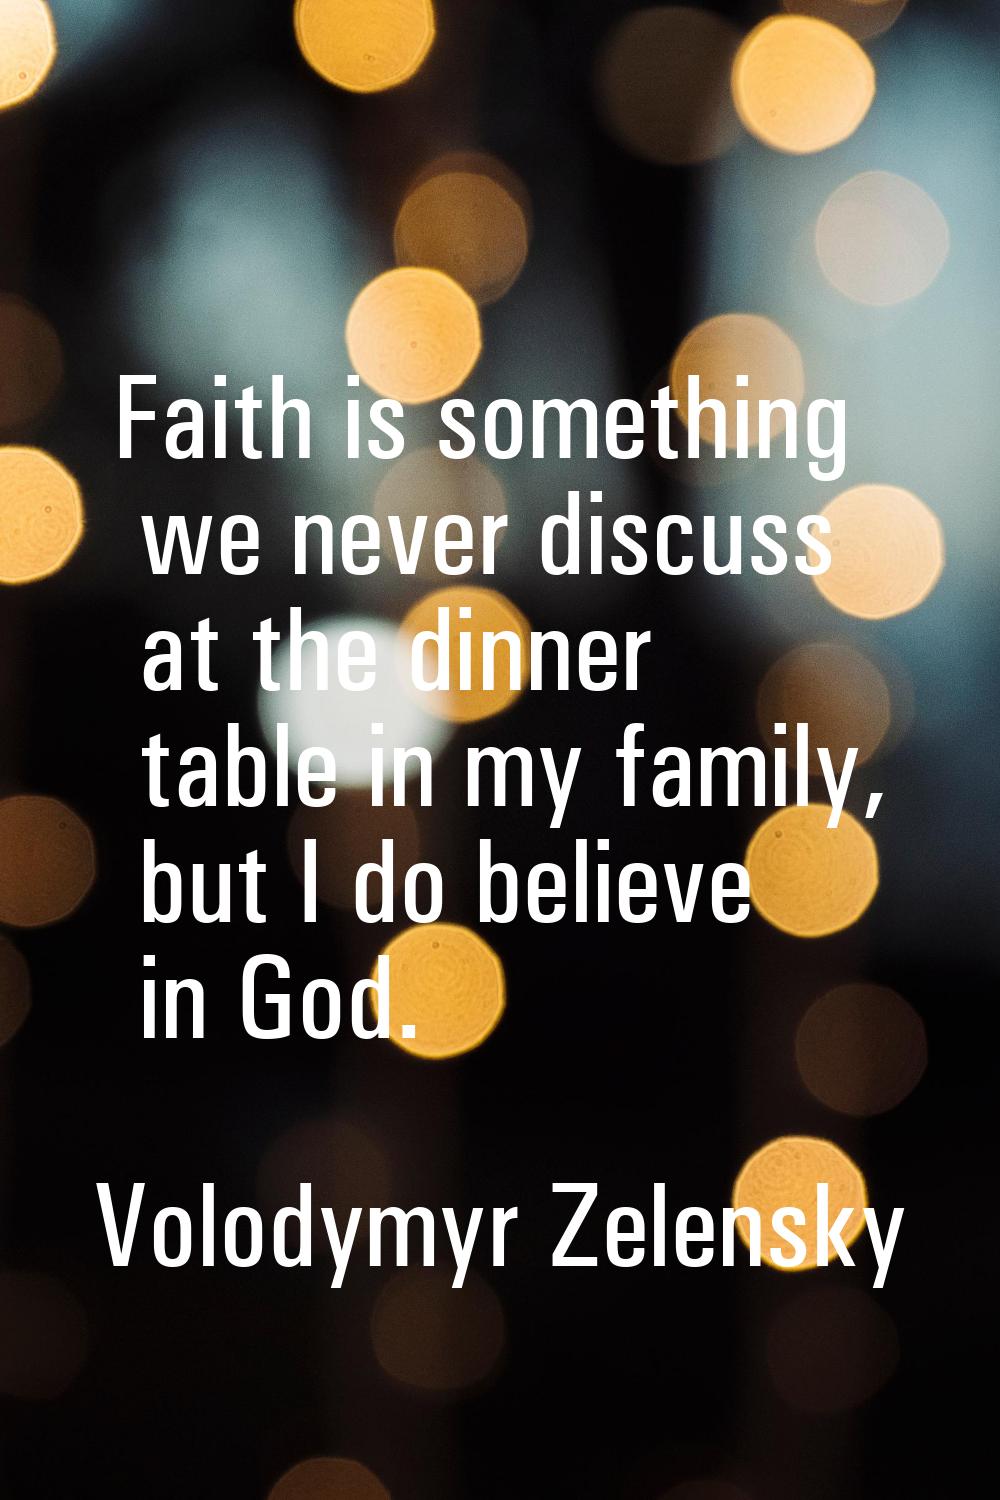 Faith is something we never discuss at the dinner table in my family, but I do believe in God.